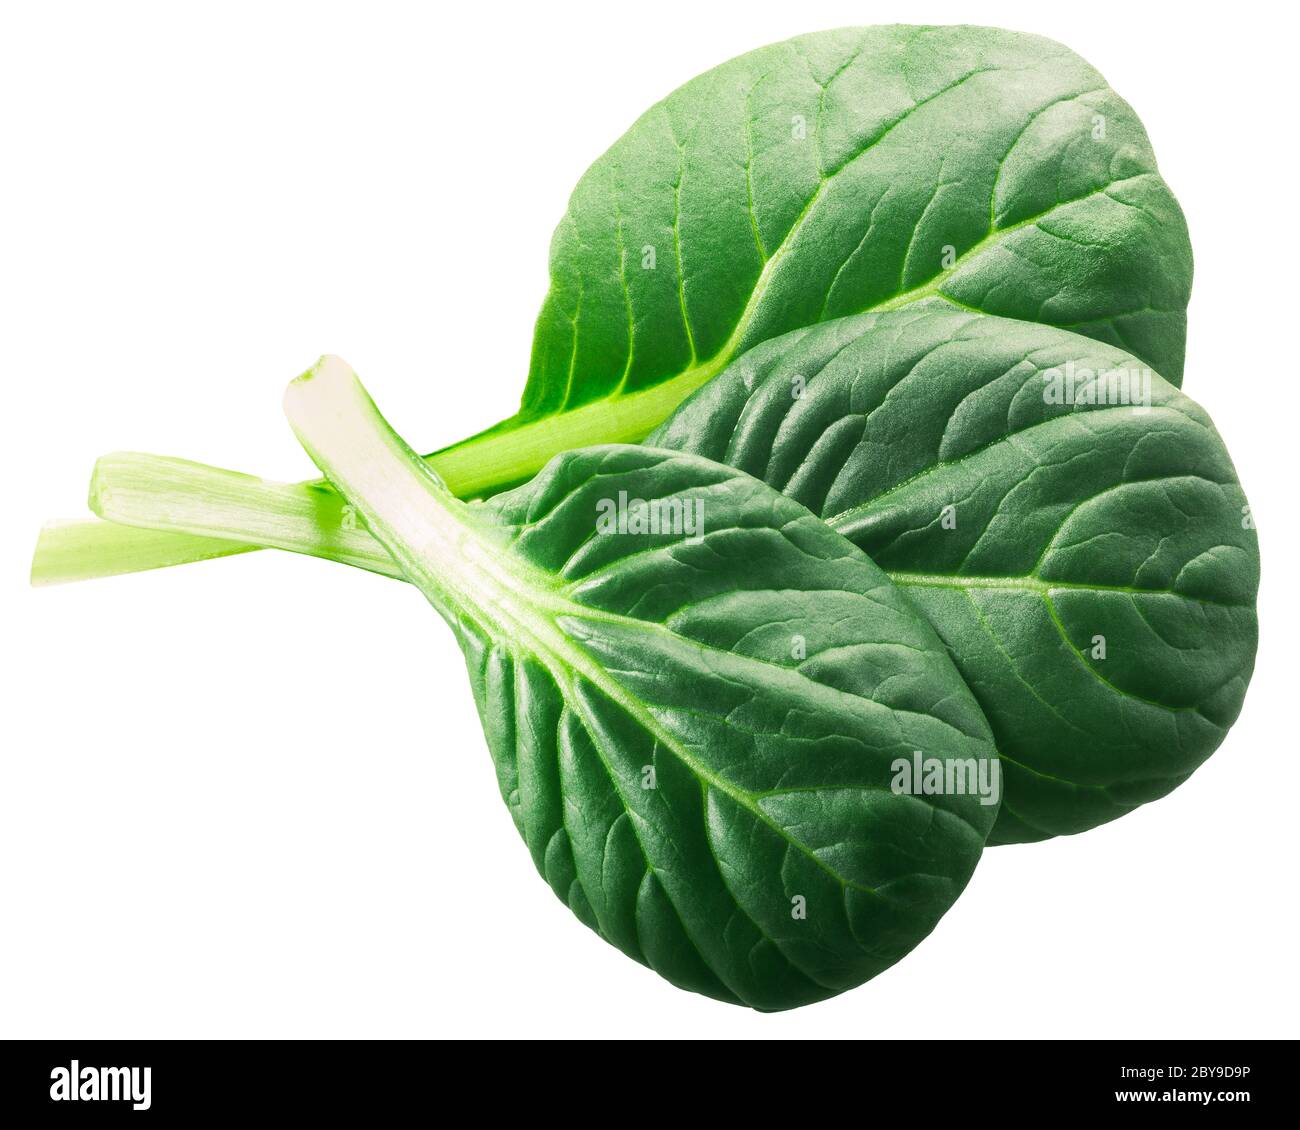 Green Tatsoi leaves (Brassica rapa var. rosularis) isolated, top view Stock Photo